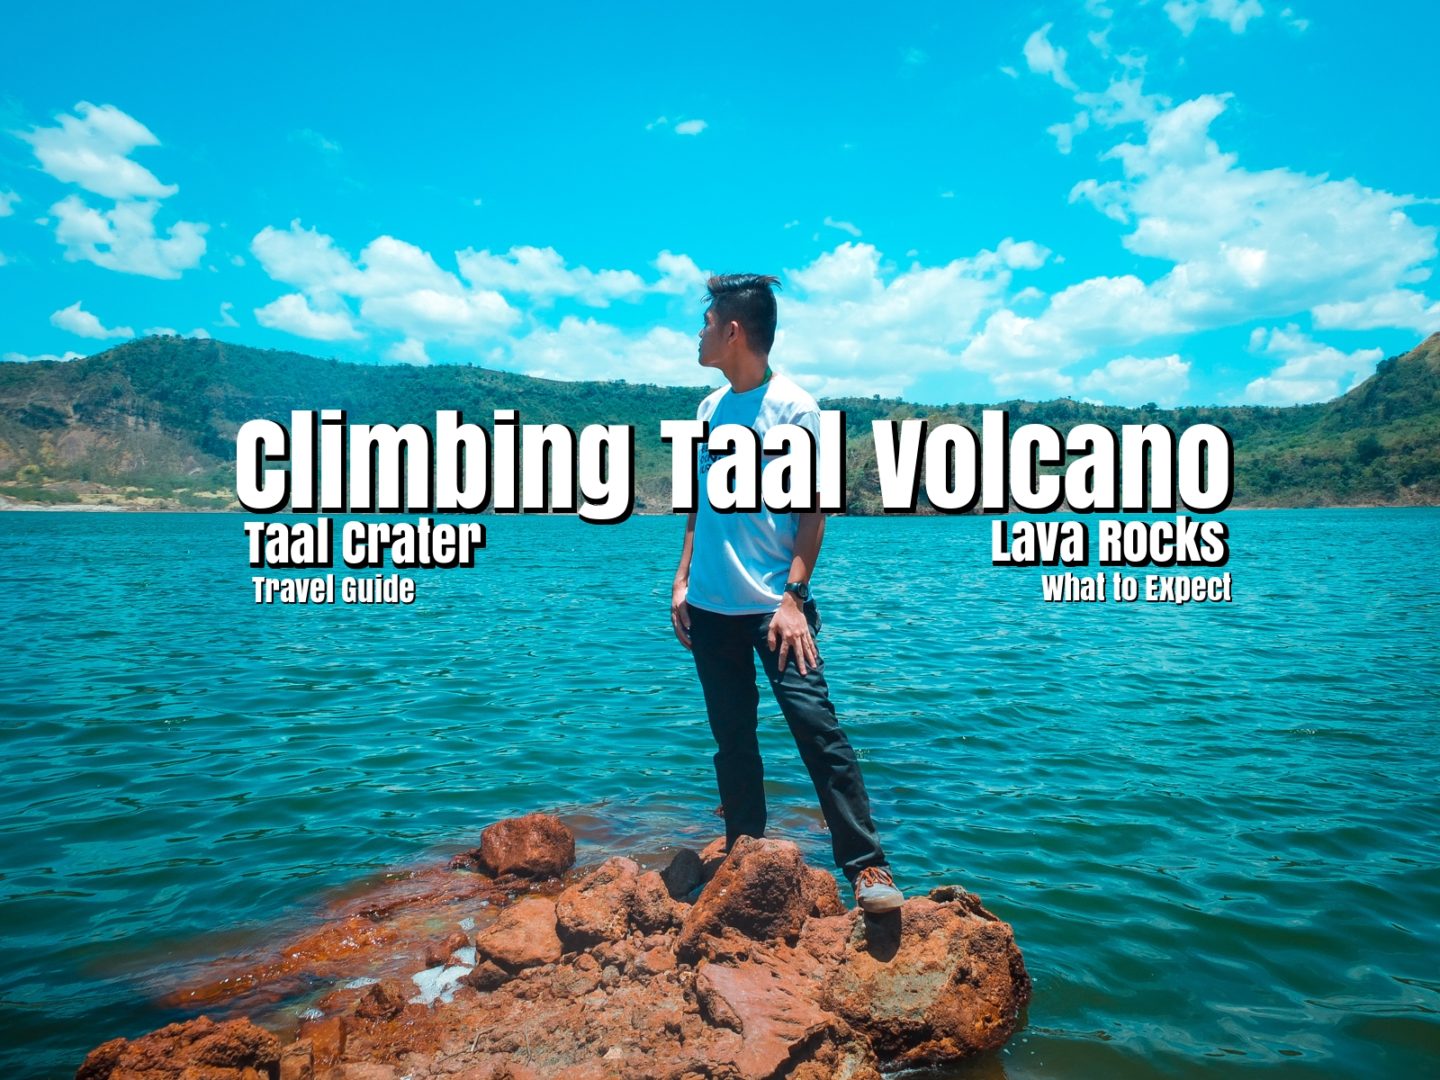 Climb Taal Volcano: To the Crater and to the Lava Rocks | Travel Guide 2019 | What to Expect